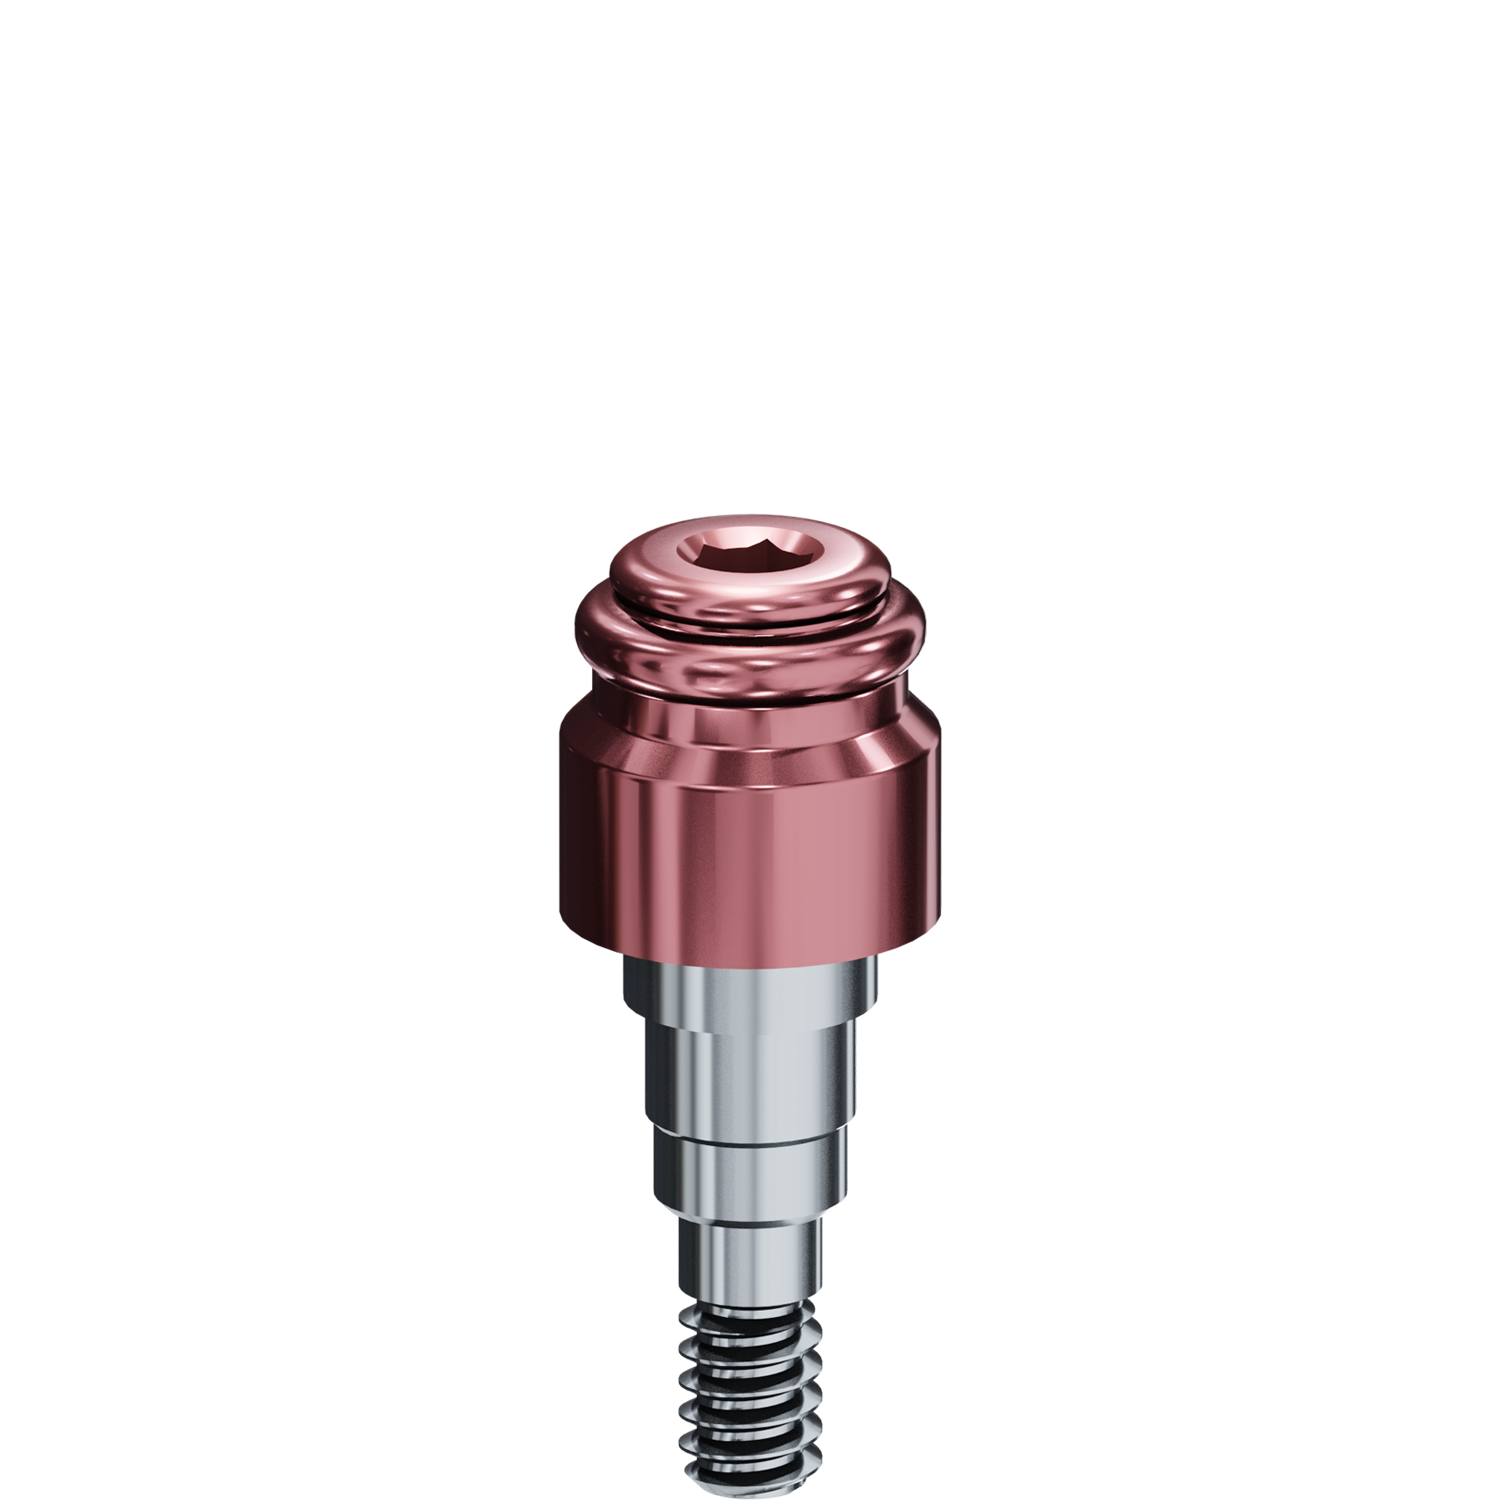 R-Tx Attachment System - Biomet 3i® - 4.1mm Certain Connection - 0.048" Drive